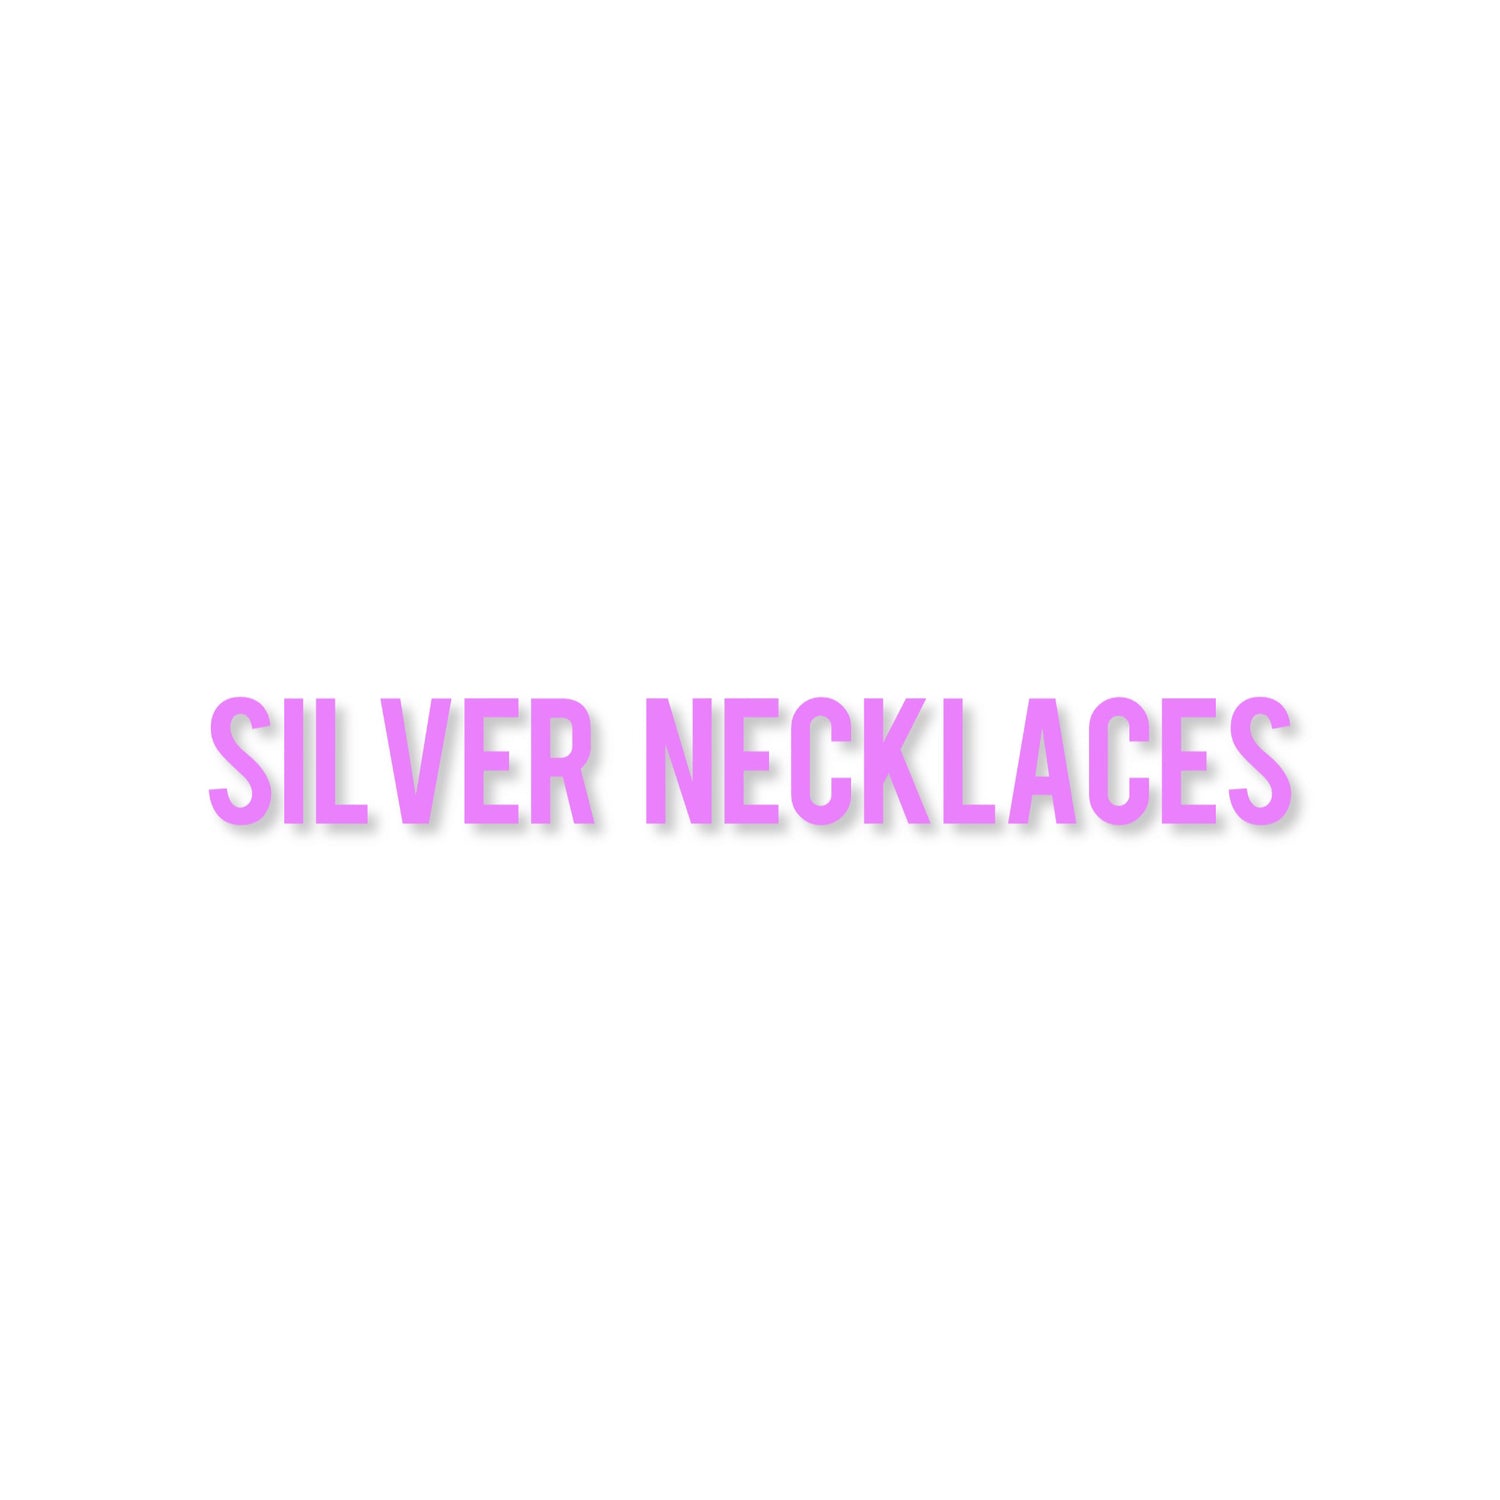 WHITE GOLD NECKLACES